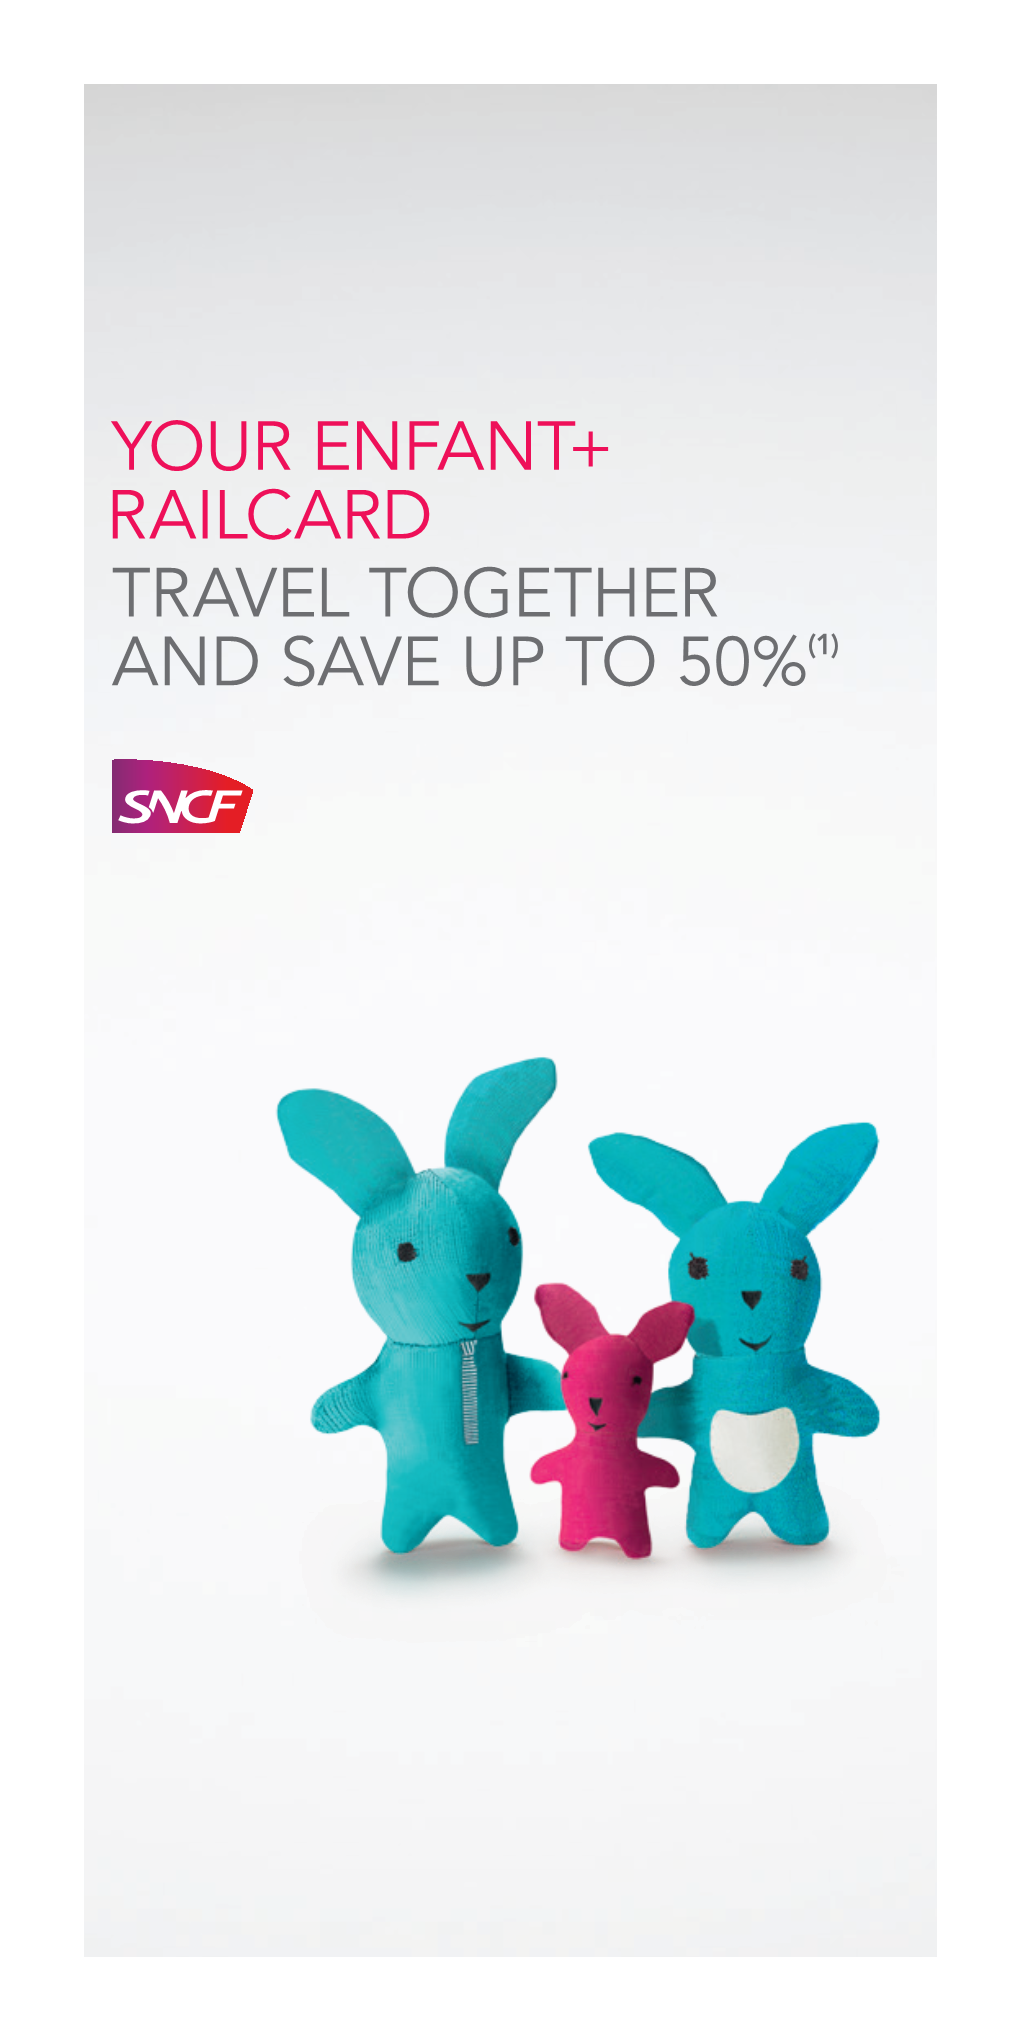 Your Enfant+ Railcard Travel Together and Save up to 50%(1) Enfant+ Railcards—More Benefits Than Ever